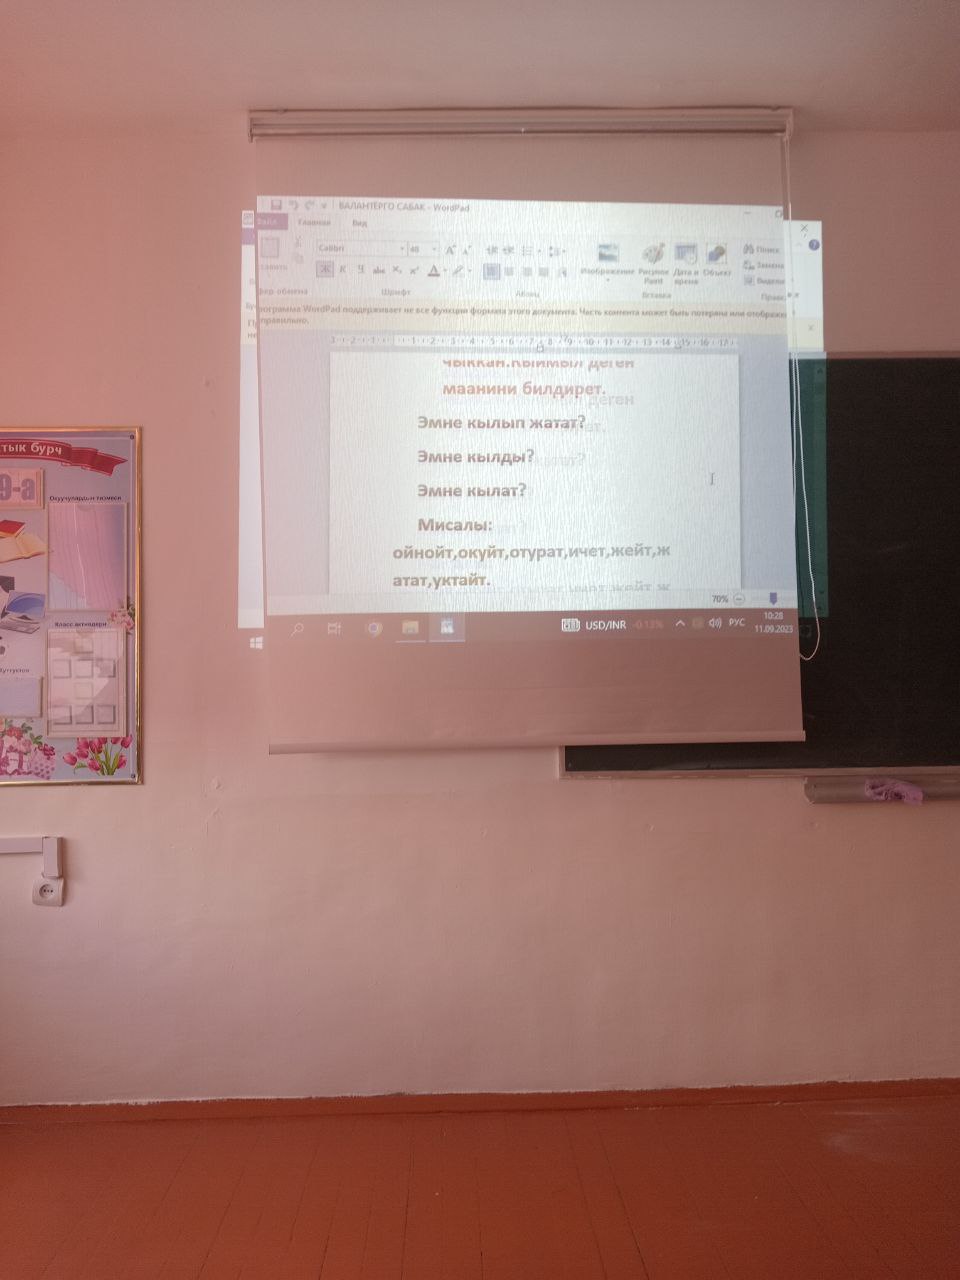 A Microsoft Word document being projected onto a roll-down overhead screen in a classroom. The Word doc has Kyrgyz words on it